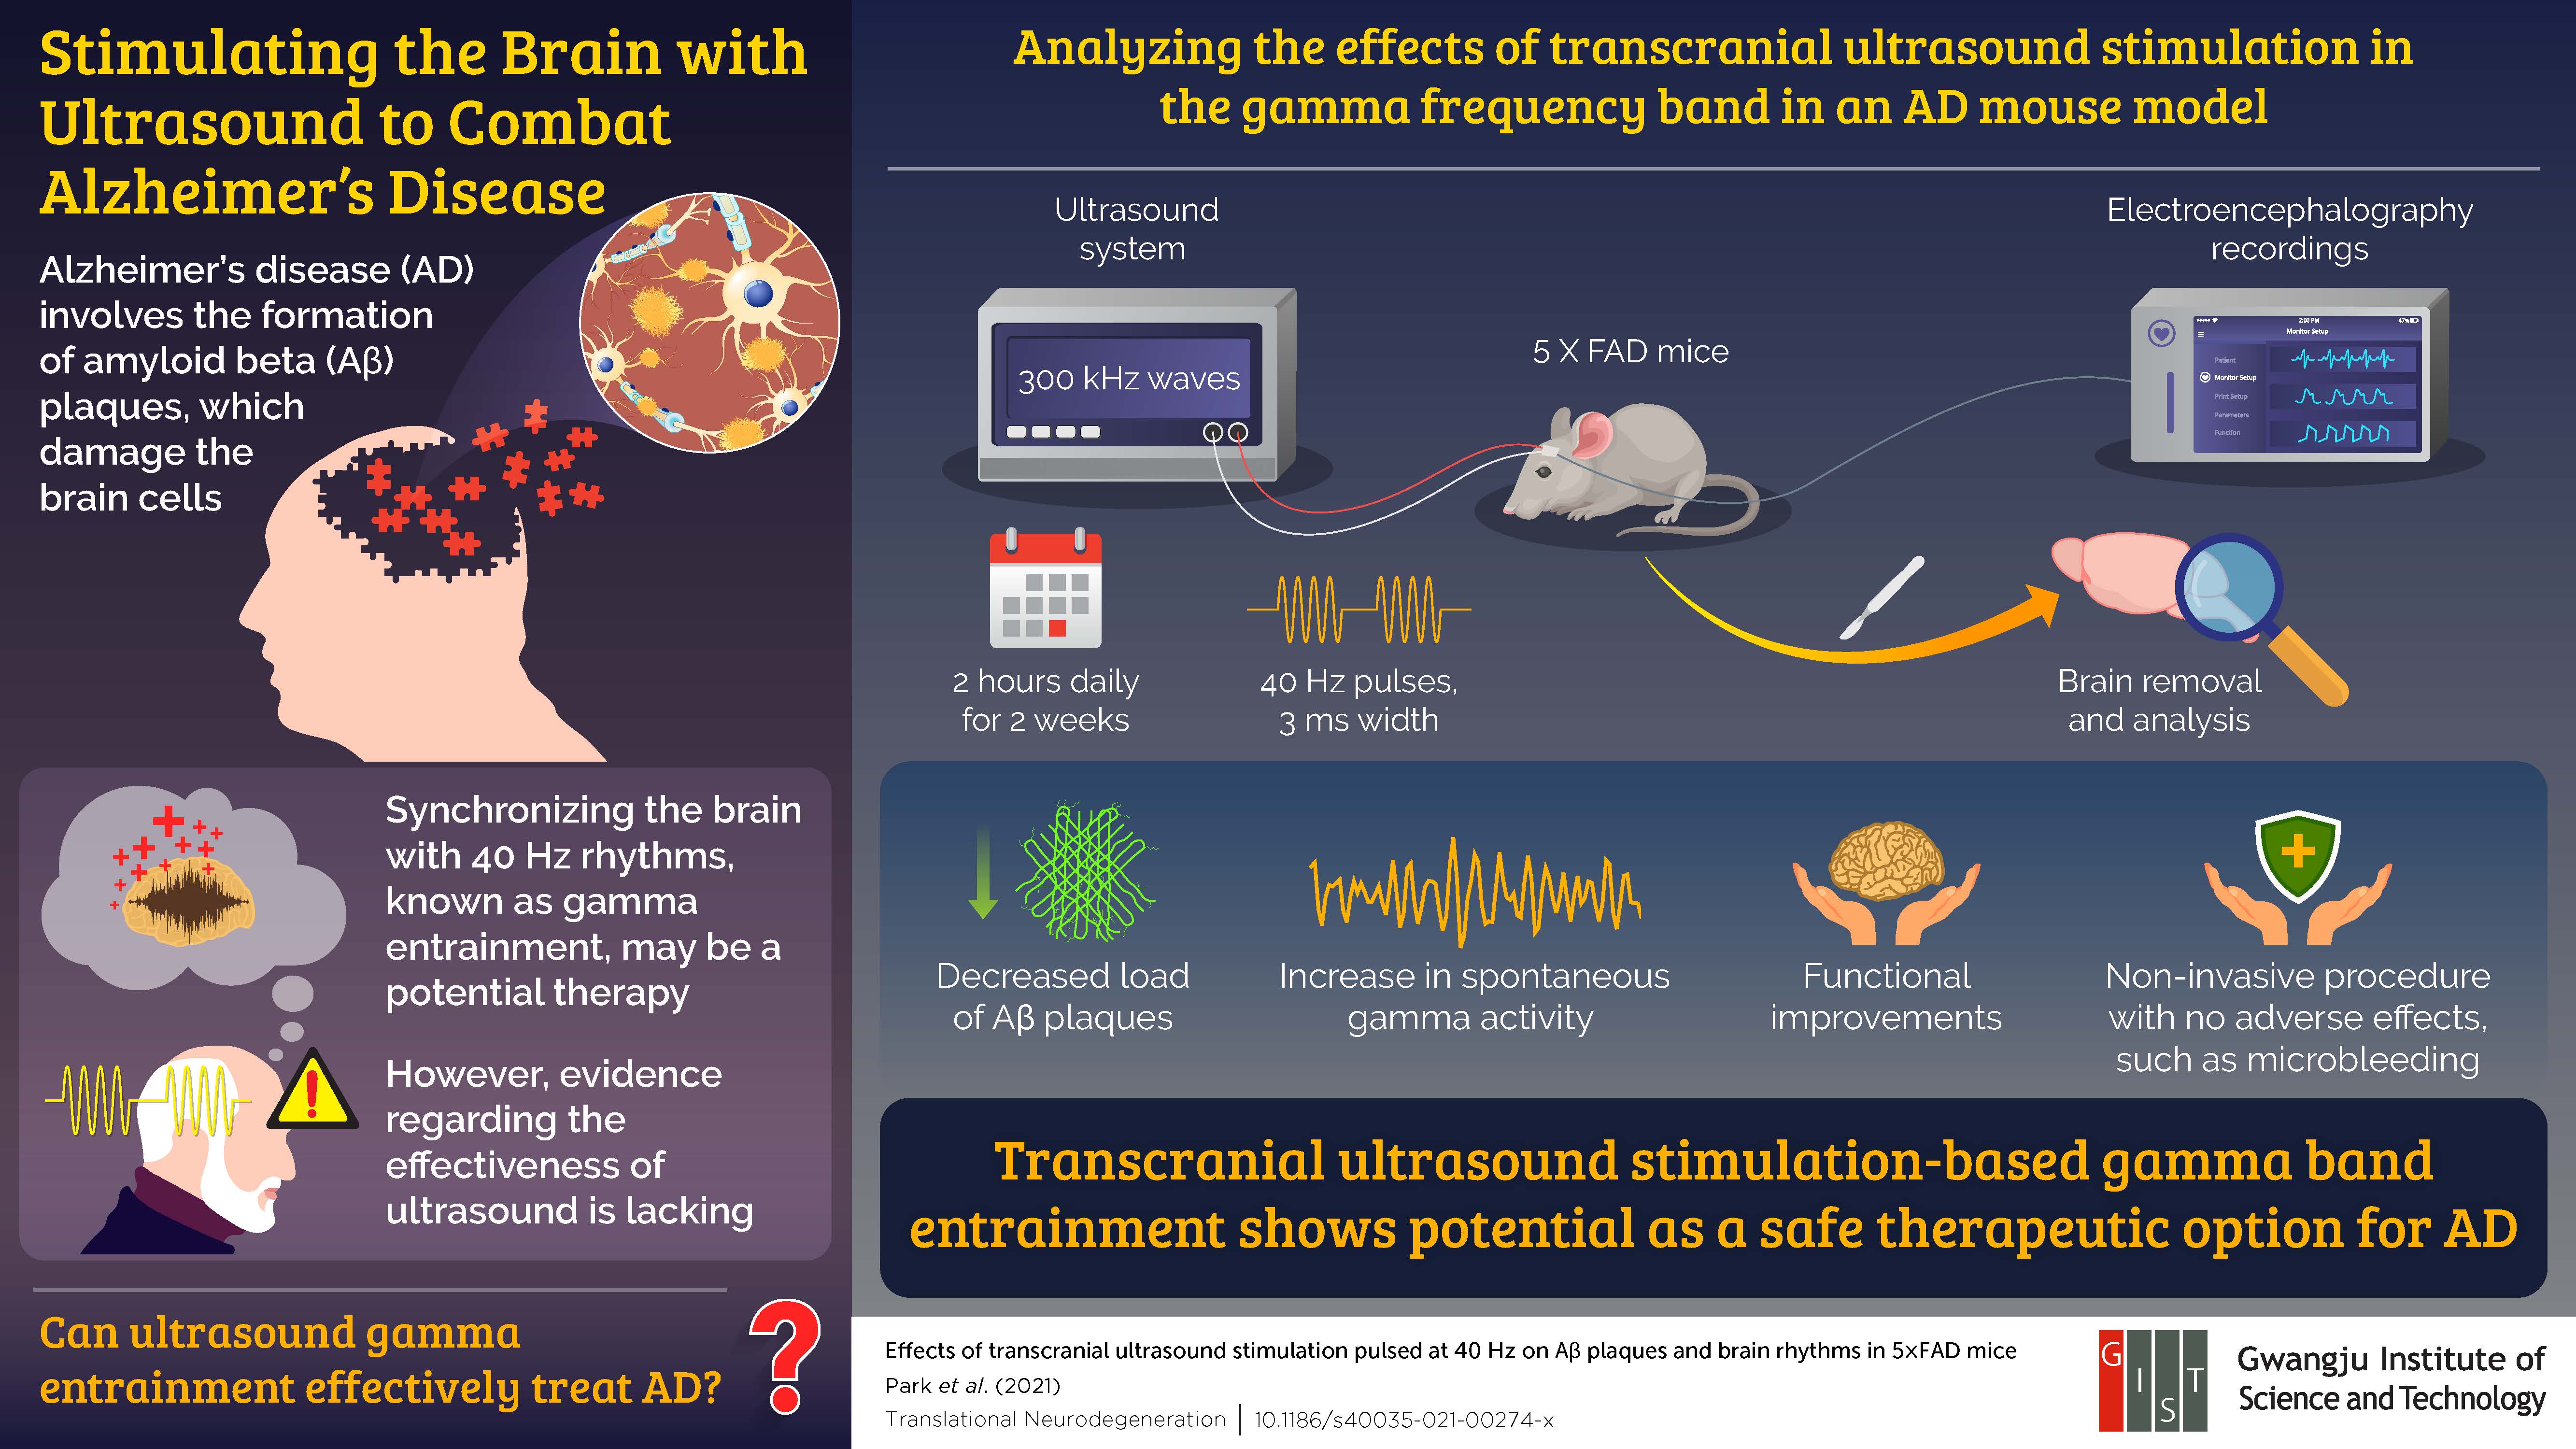 Researchers from the Gwangju Institute of Science and Technology Propose Ultrasound Stimulation as an Effective Therapy for Alzheimer’s Disease in New Study 이미지